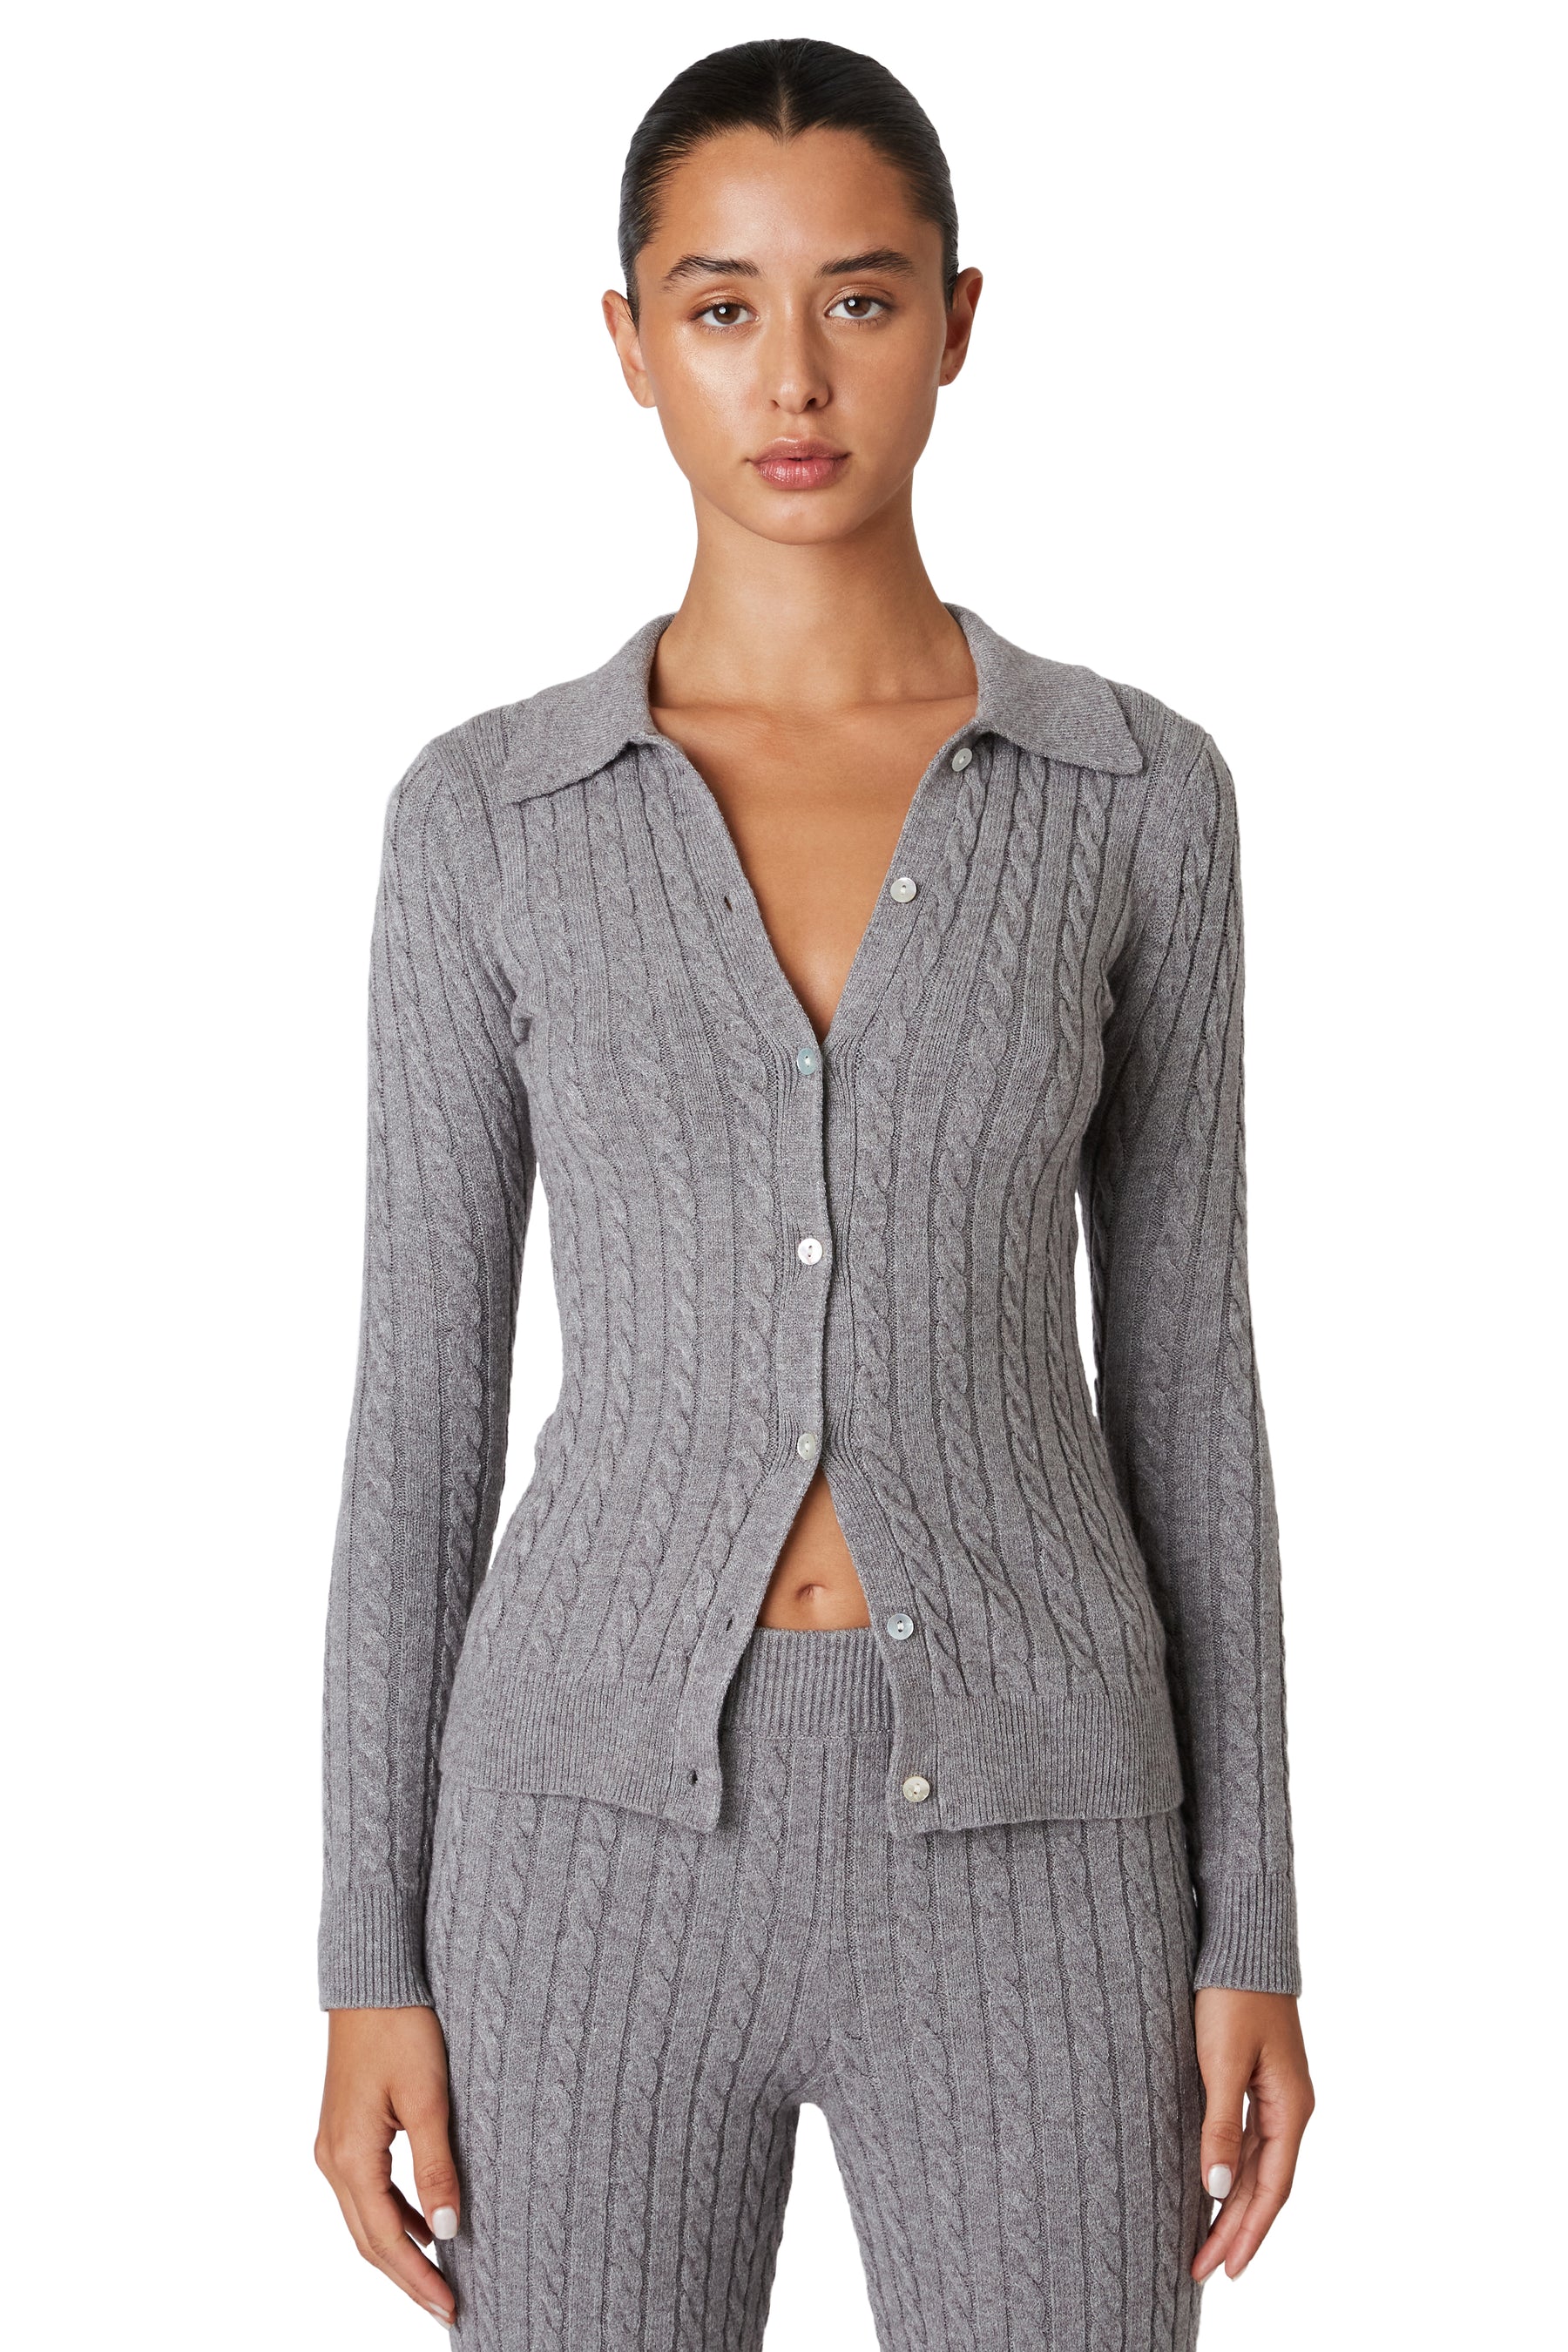 NIA Willow Cardigan - Cable Knit Greige